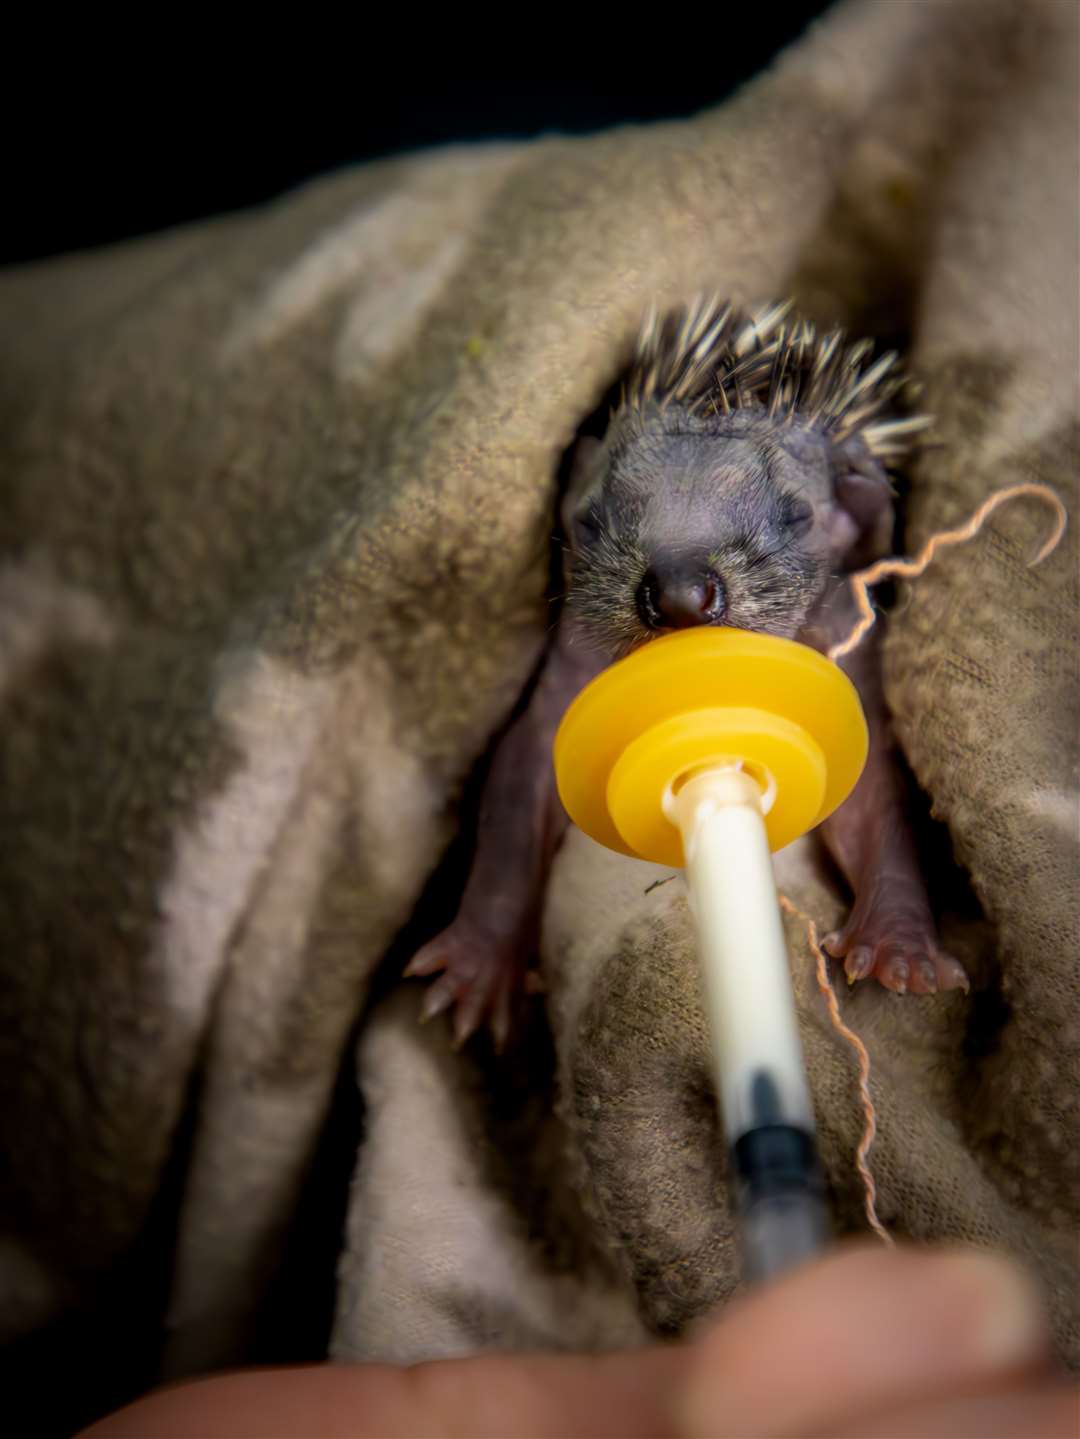 Many hoglets need help getting their weight up to survive the winter months. Picture: Scottish SPCA